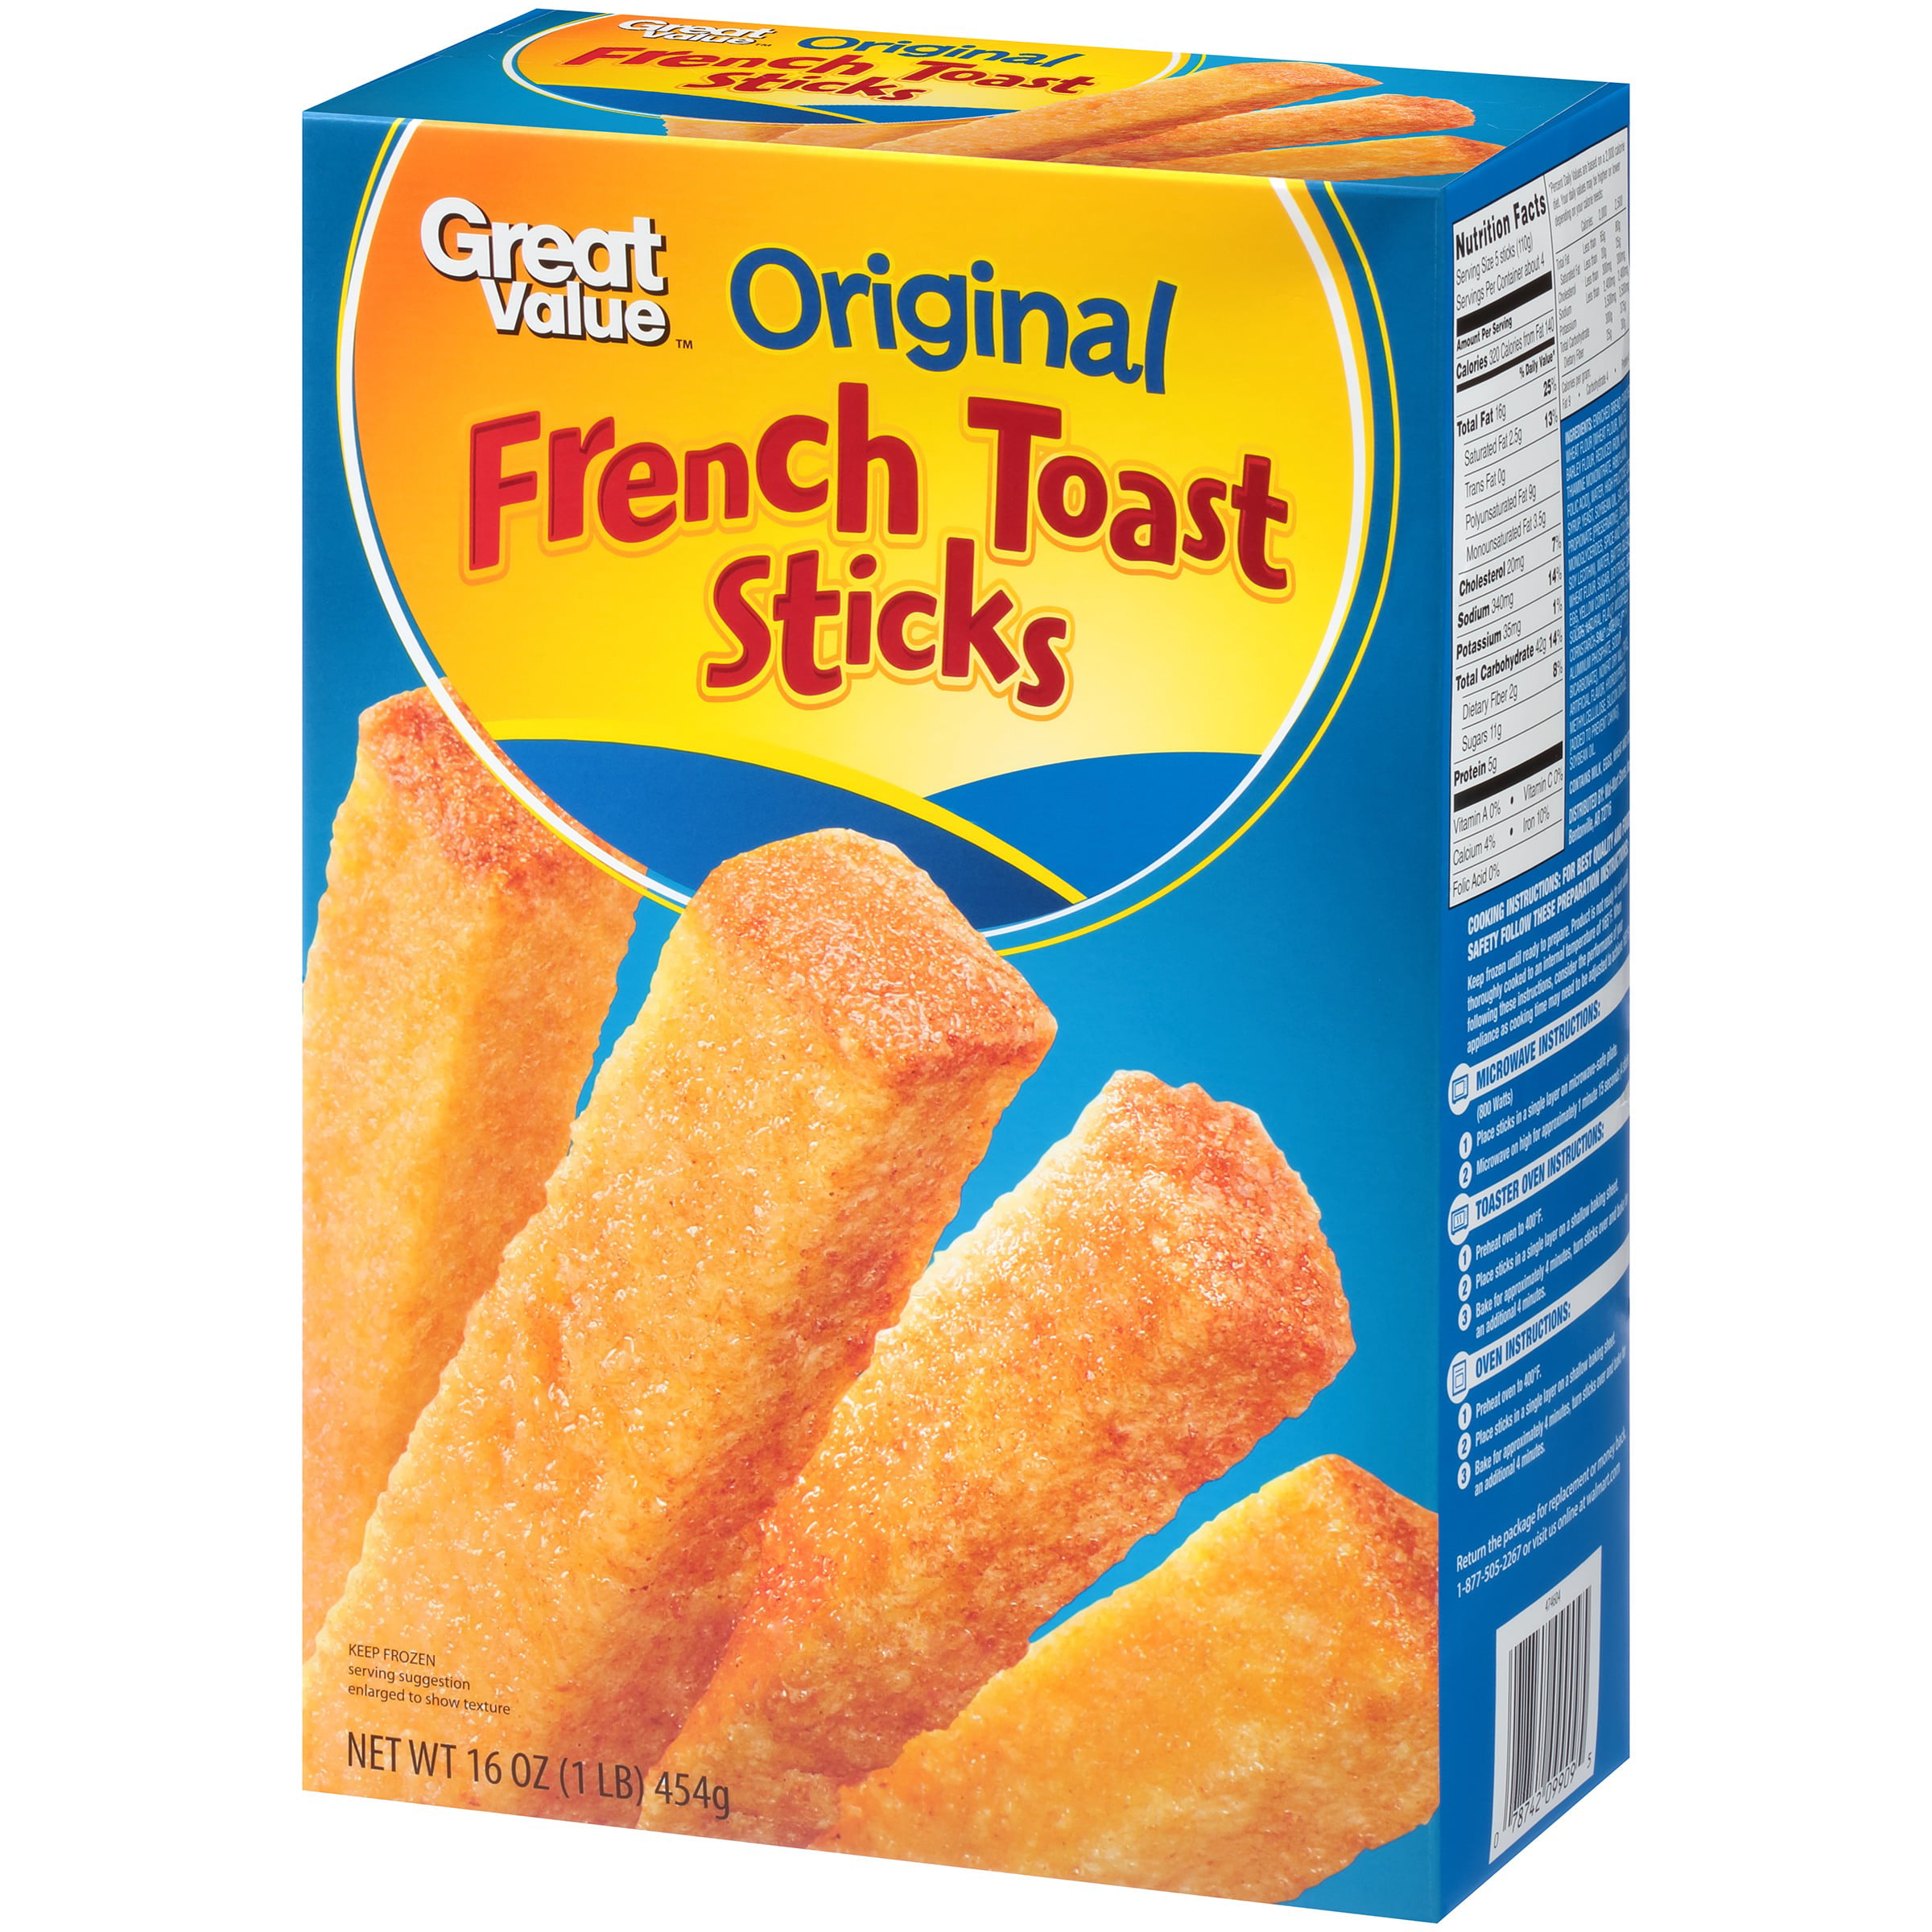 Frozen French Toast Sticks | delicieux recette